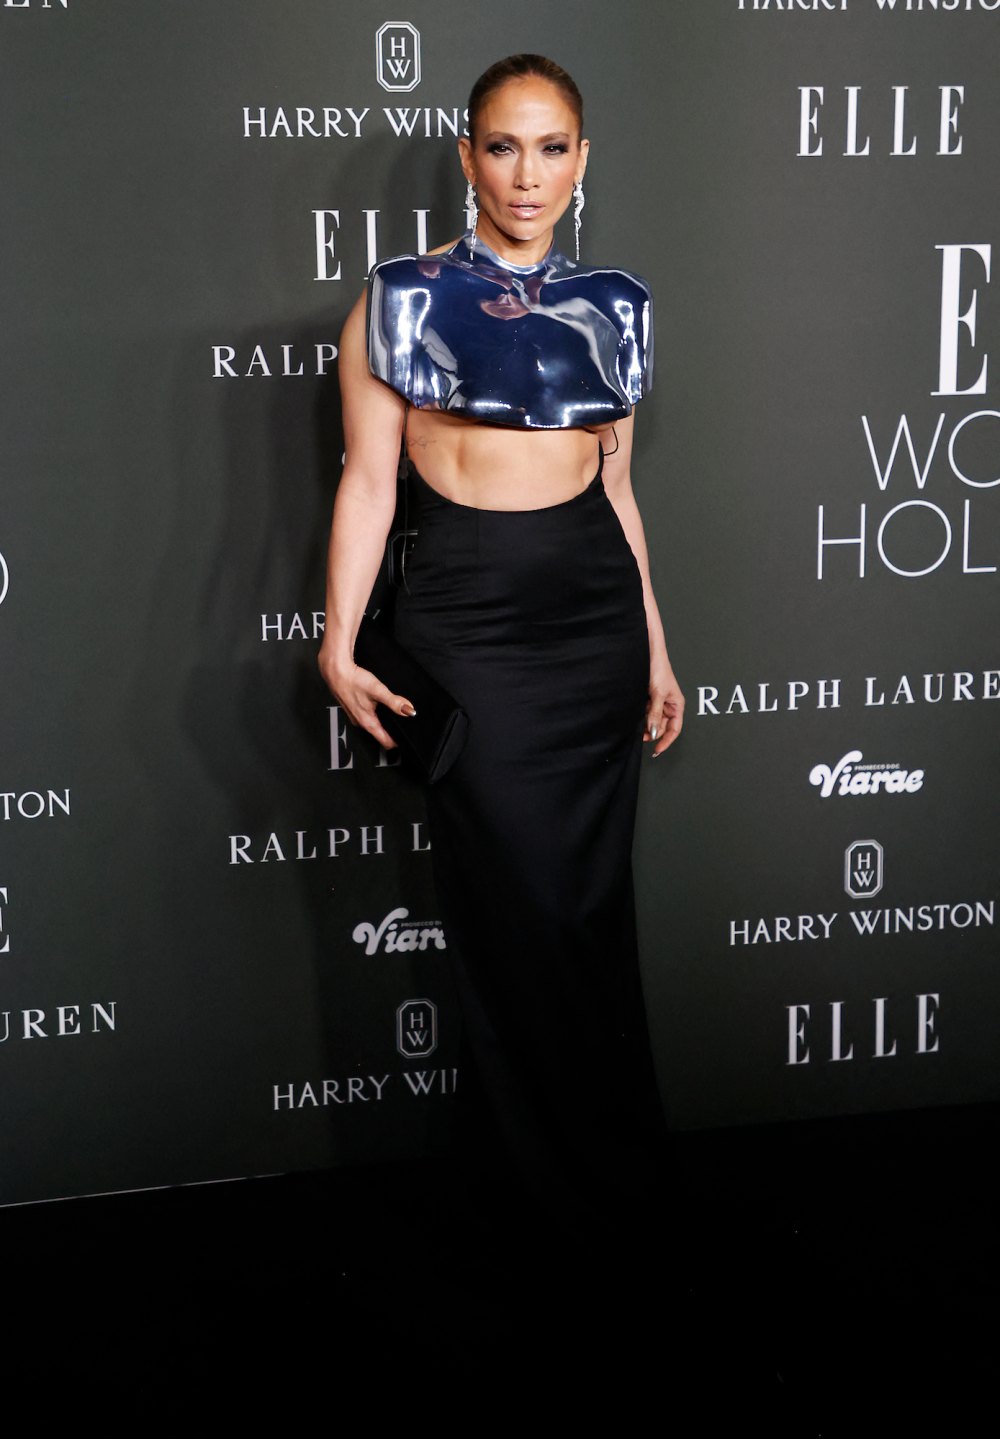 Jennifer Lopez Dares to Wear Skin-Baring Breastplate at Elle Women in Hollywood Awards